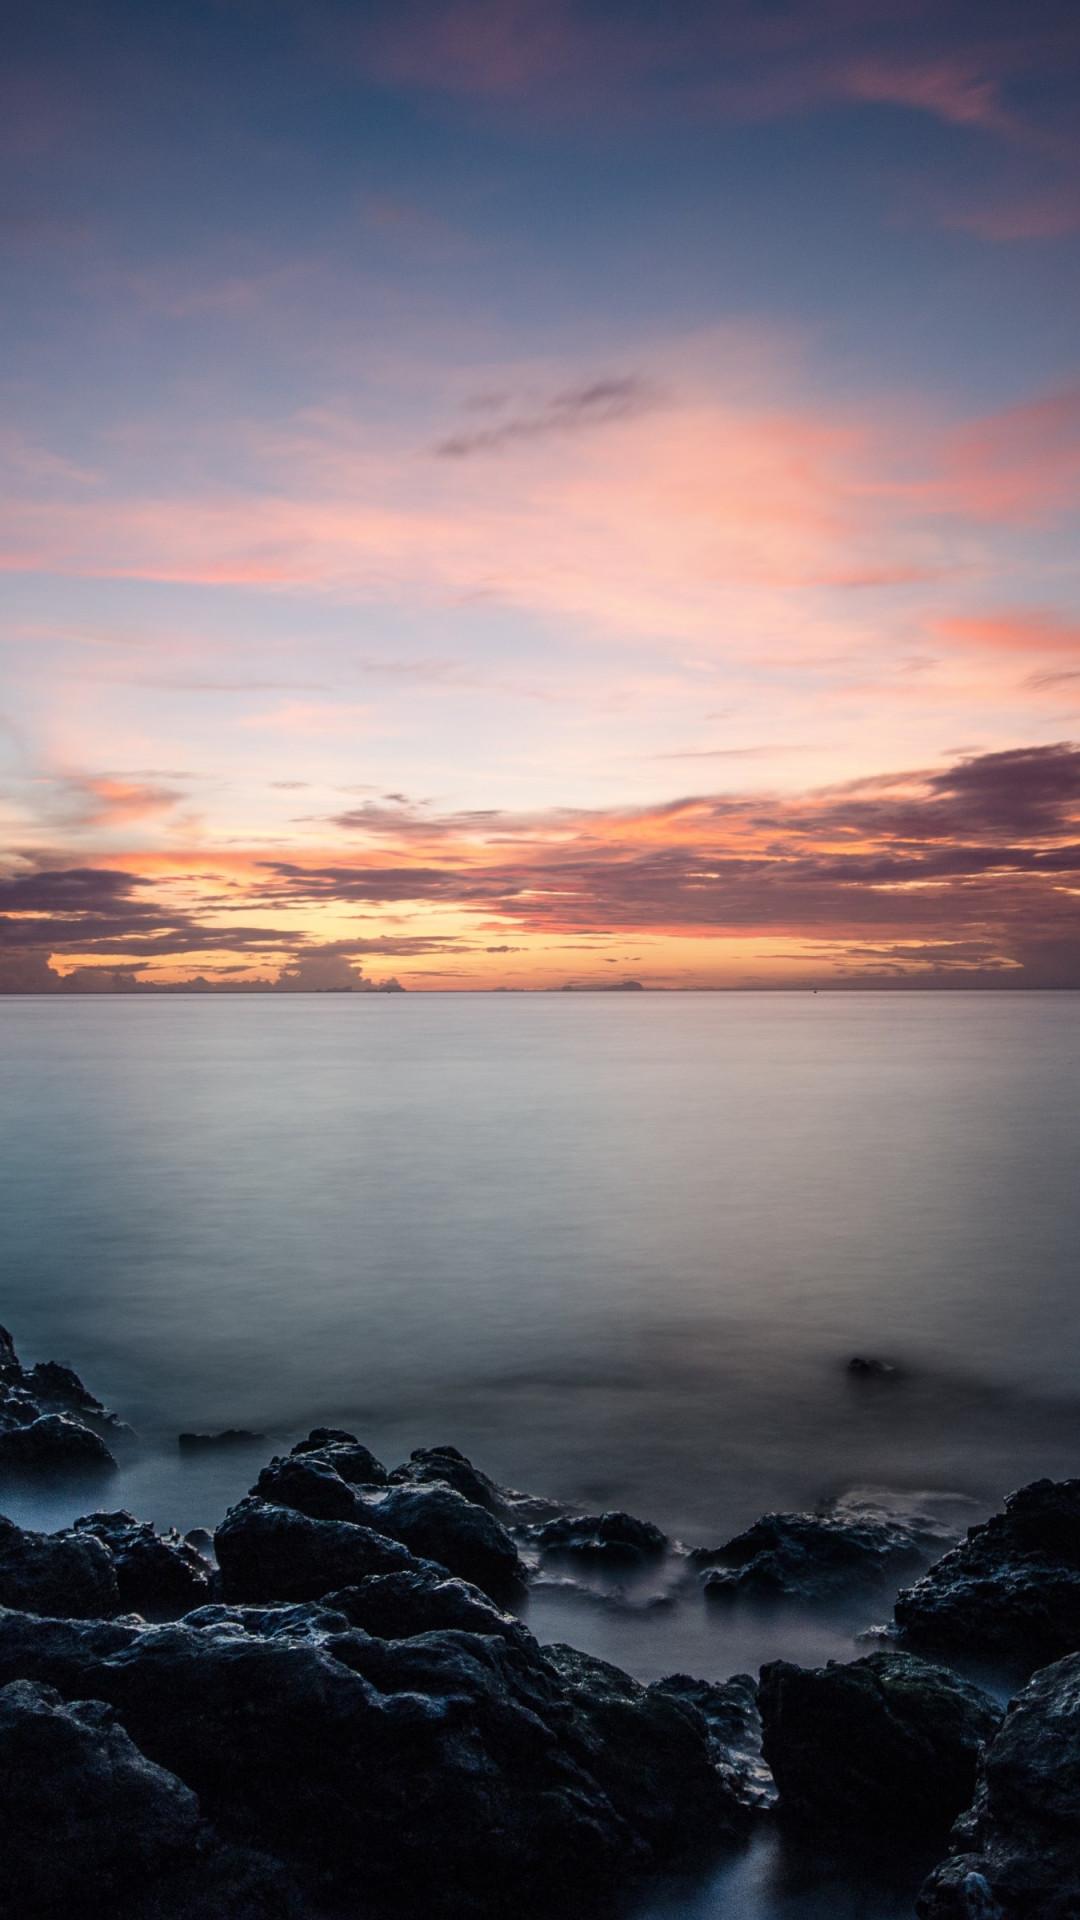 Download wallpaper: Sunset, rocks, clouds, view from Thailand 1080x1920